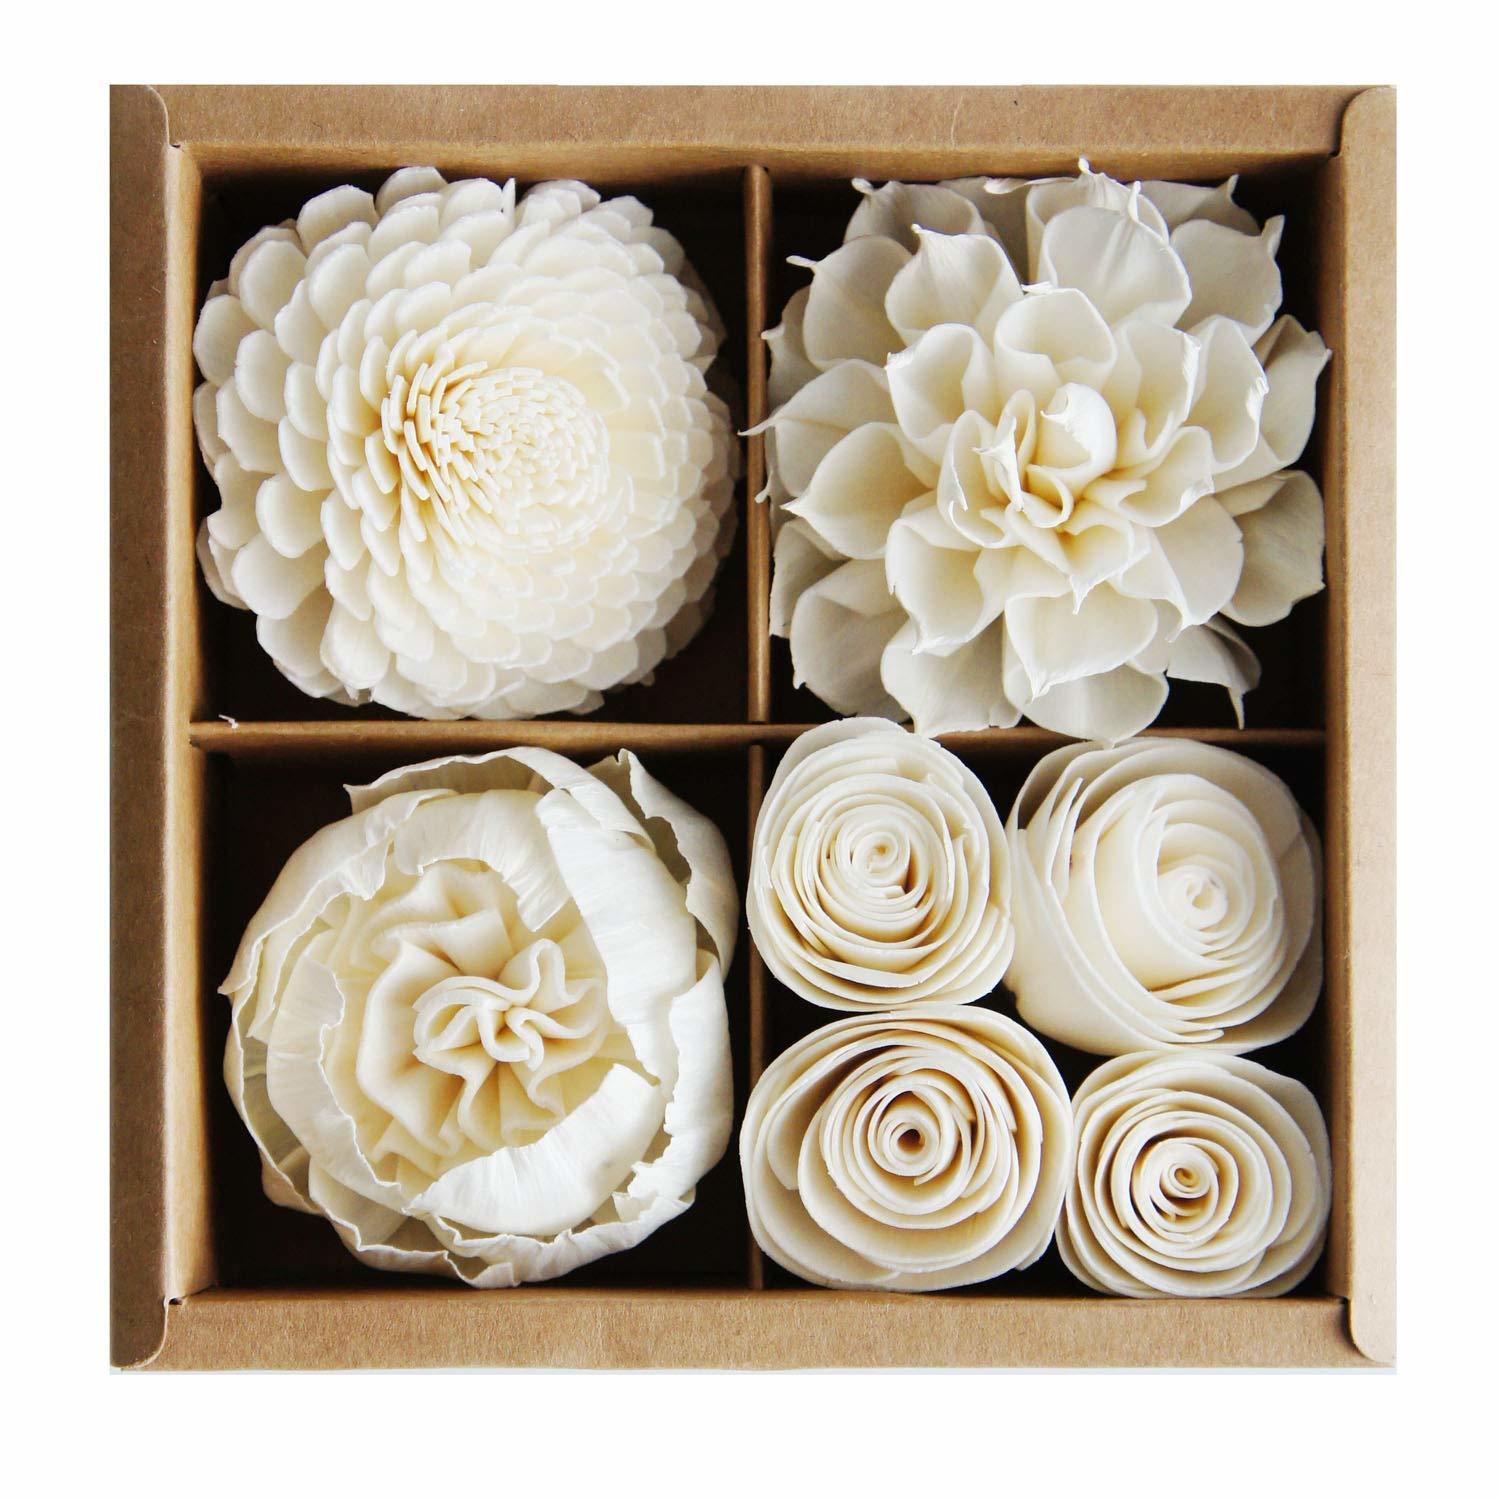 Mixed White Sola Flower with Cotton Wick Diffuser Set - $51.75